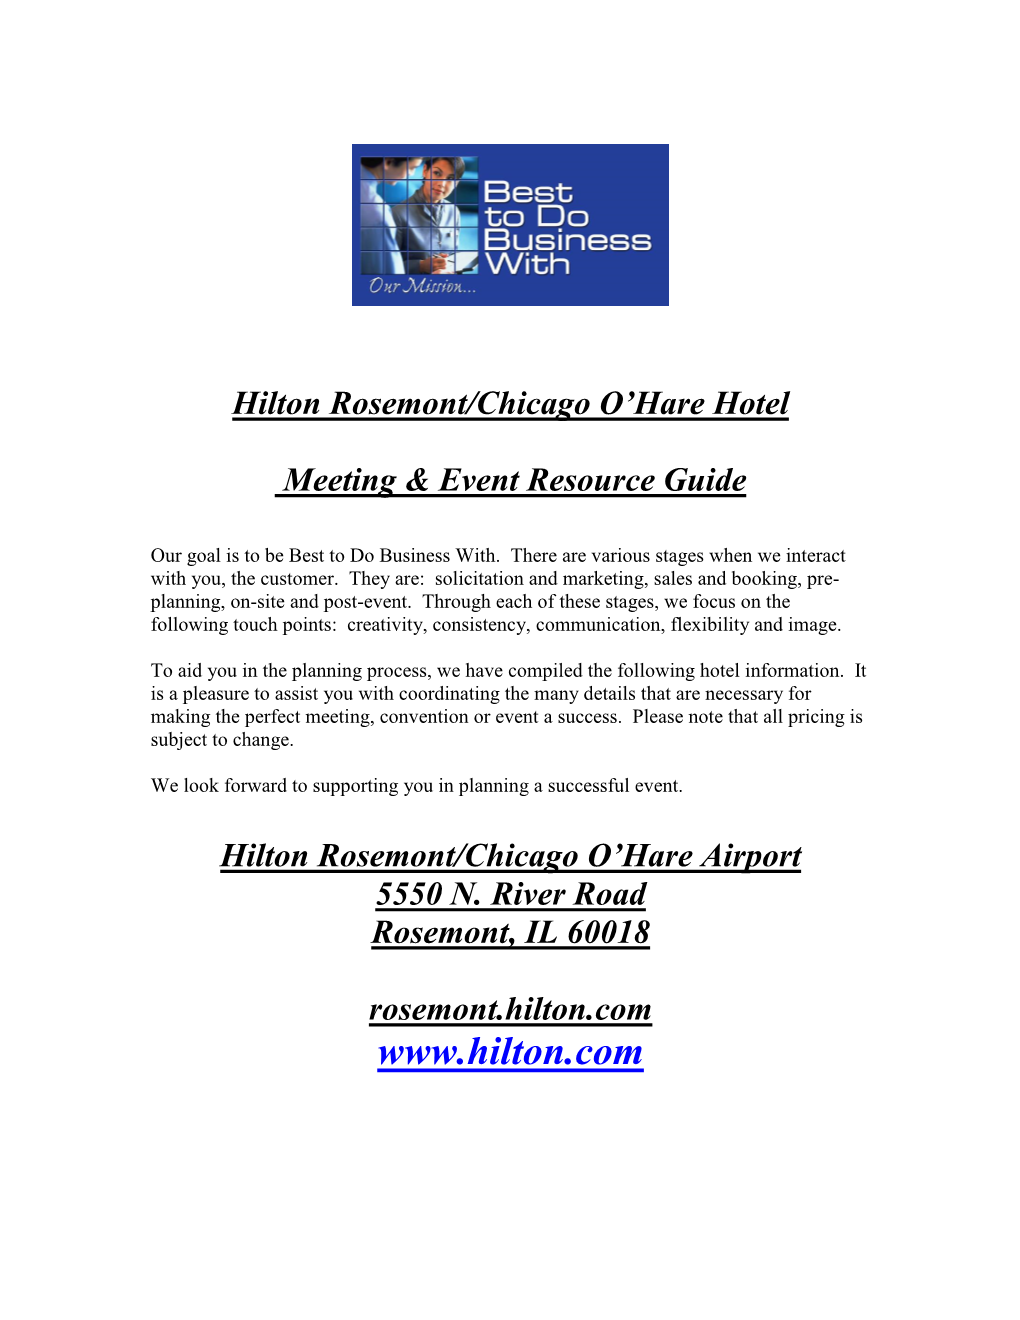 Hilton Rosemont/Chicago O'hare Hotel Meeting & Event Resource